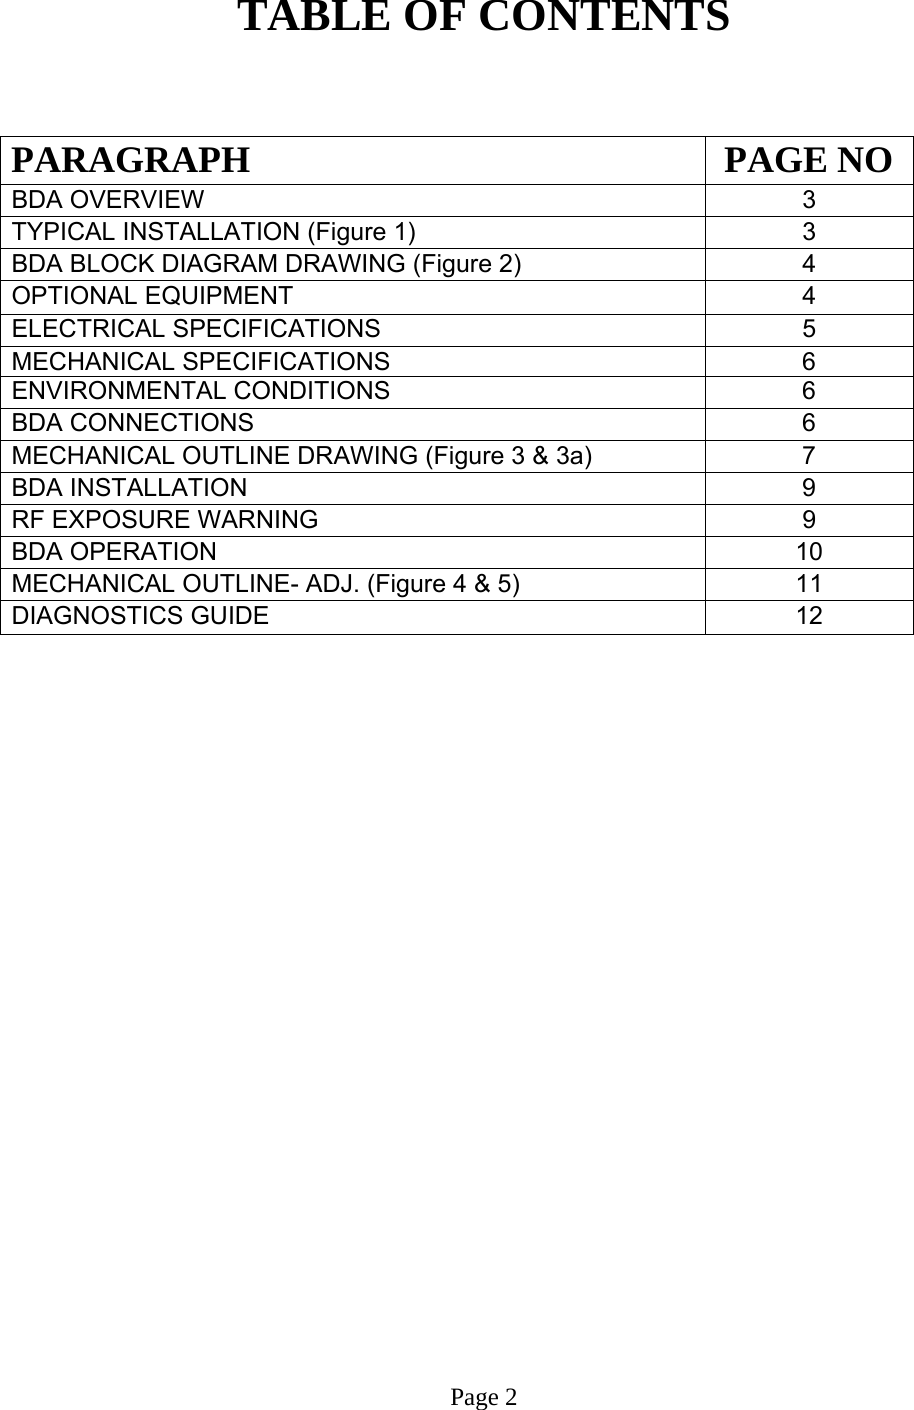  TABLE OF CONTENTS   PARAGRAPH PAGE NOBDA OVERVIEW   3 TYPICAL INSTALLATION (Figure 1) 3 BDA BLOCK DIAGRAM DRAWING (Figure 2)  4 OPTIONAL EQUIPMENT 4 ELECTRICAL SPECIFICATIONS   5  MECHANICAL SPECIFICATIONS   6 ENVIRONMENTAL CONDITIONS   6  BDA CONNECTIONS    6  MECHANICAL OUTLINE DRAWING (Figure 3 &amp; 3a)  7  BDA INSTALLATION  9  RF EXPOSURE WARNING  9 BDA OPERATION 10  MECHANICAL OUTLINE- ADJ. (Figure 4 &amp; 5)  11  DIAGNOSTICS GUIDE  12                            Page 2 